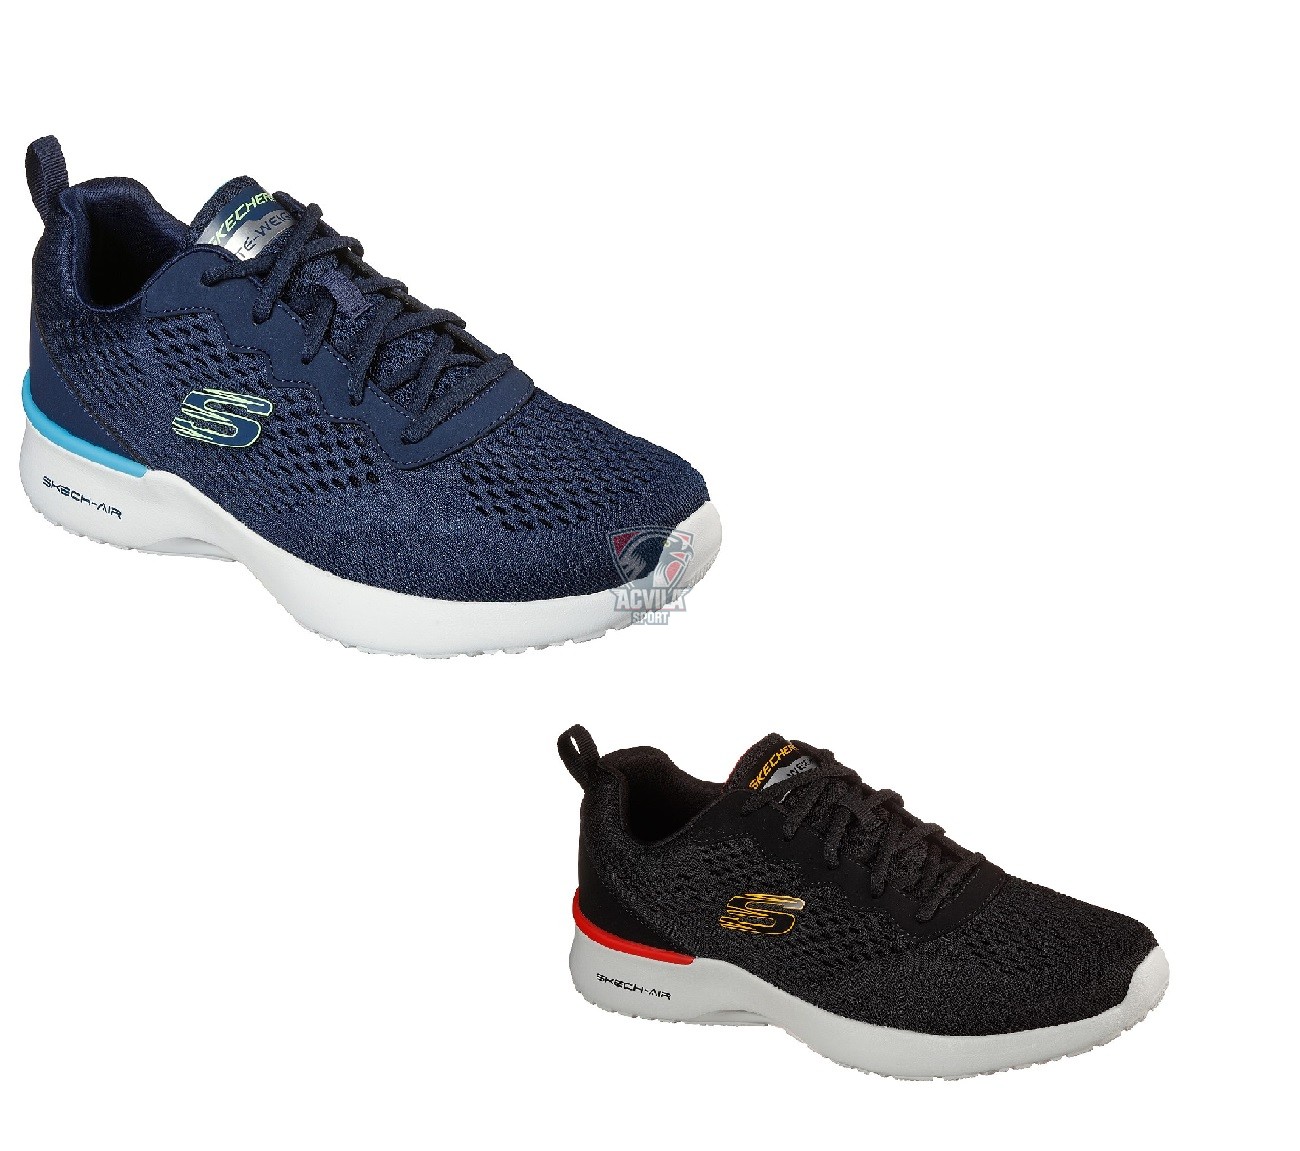 Photo acvilasport - SKECHERS Skech-Air Dynamight